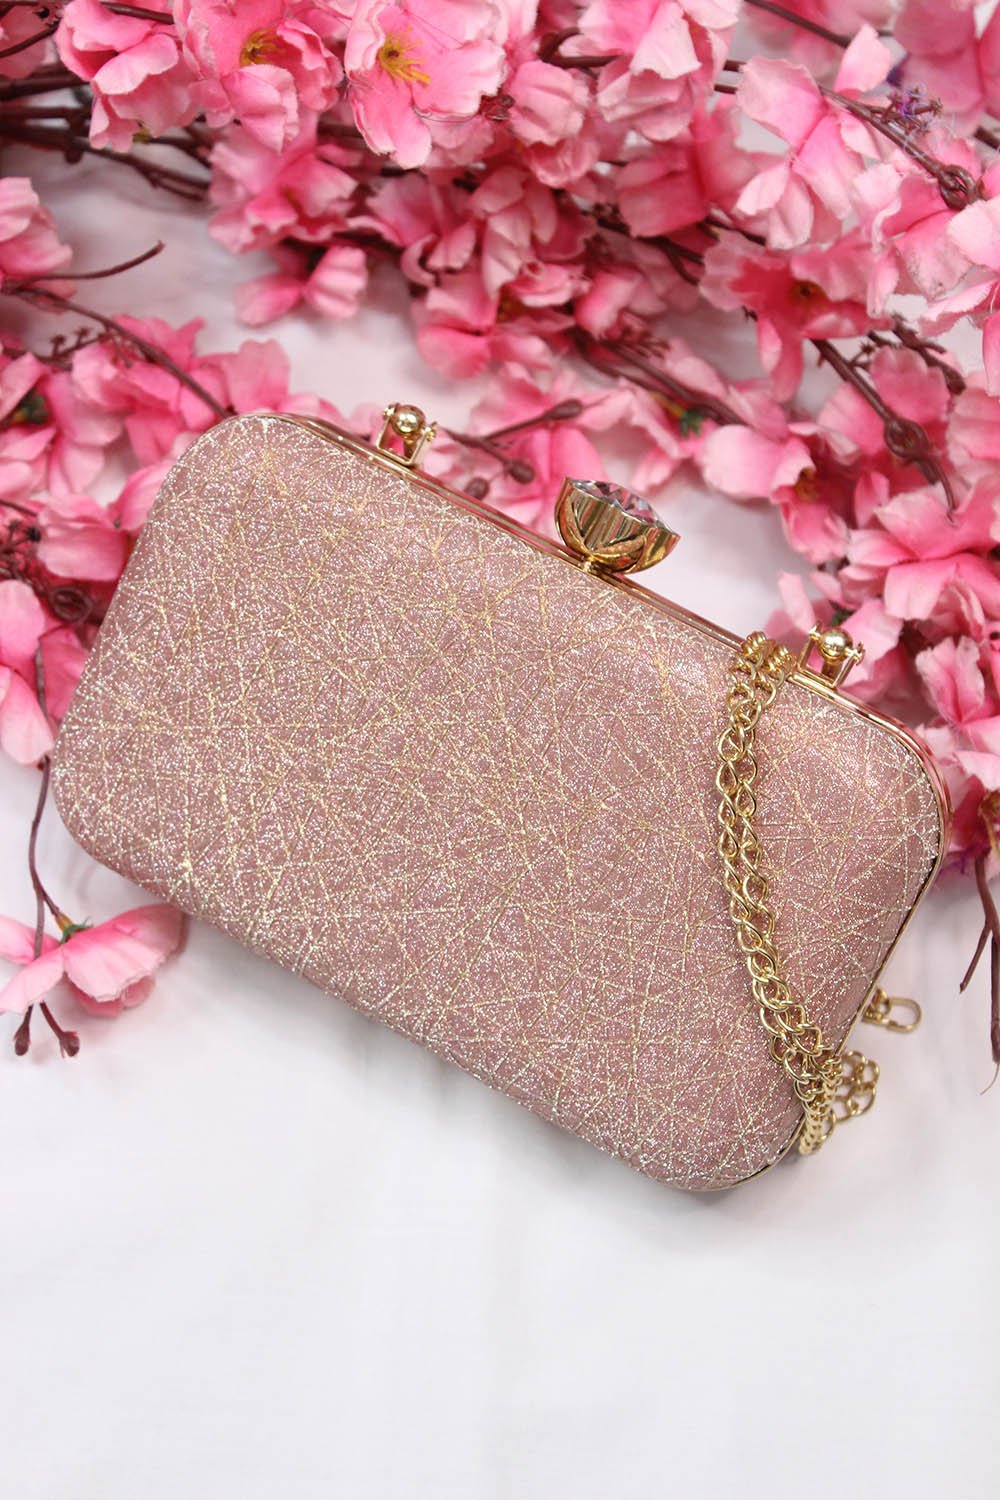 Powder Pink and Ecru Wedding Clutch Bag With Gold Glitter / Suedette  Evening Clutch Bag / Customizable Suede Evening Bag / Small Chain Bag - Etsy